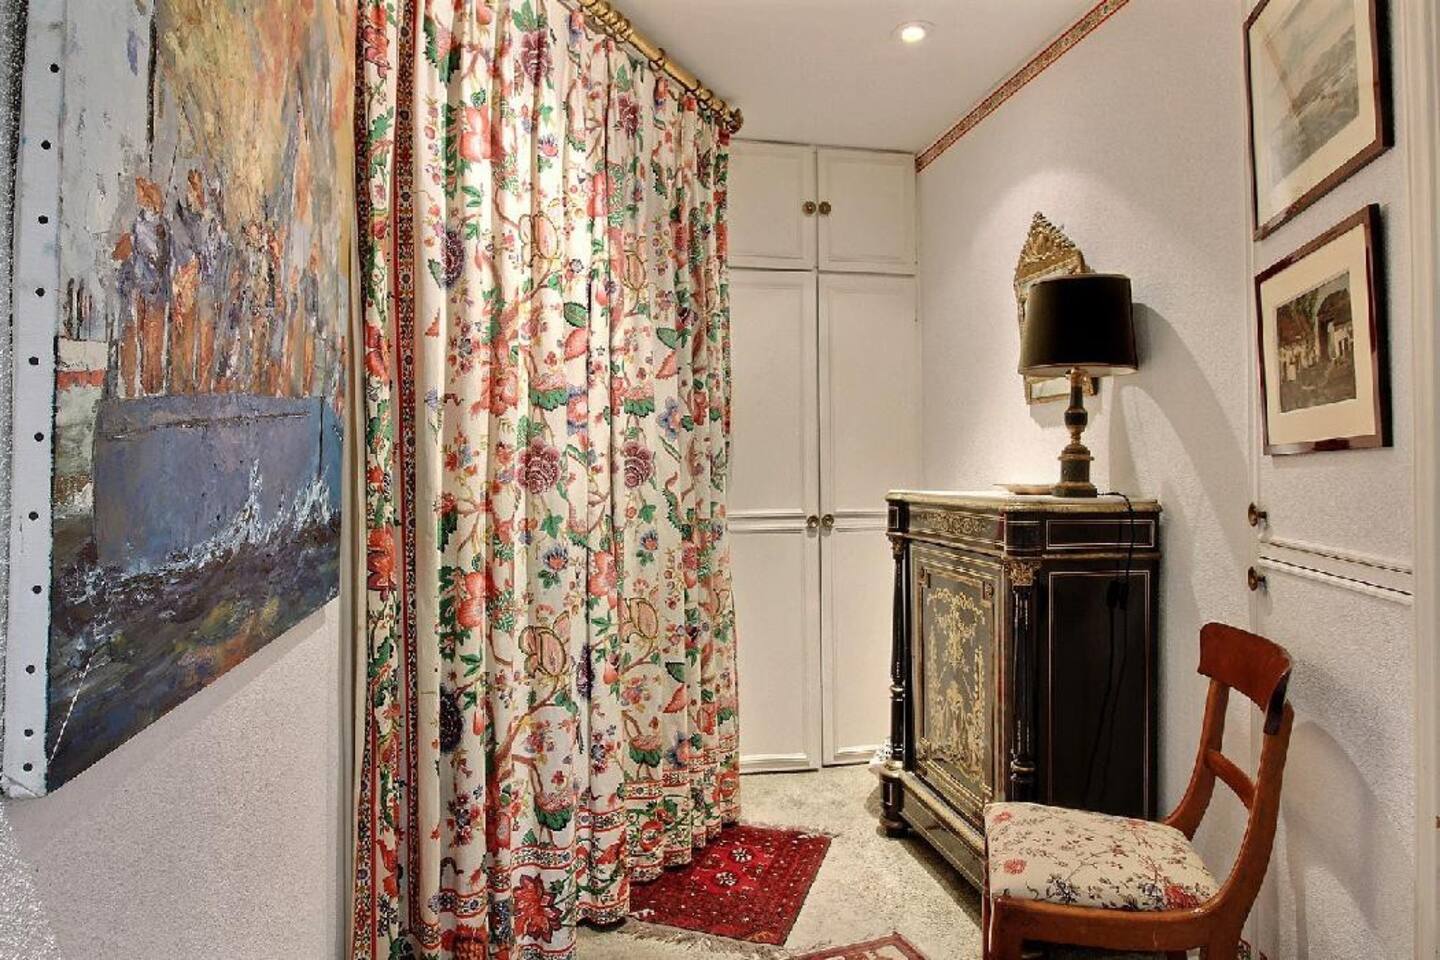 The apartment is filled with classical furnishings and decorations, creating an old Parisian ambiance while ensuring your comfort.
